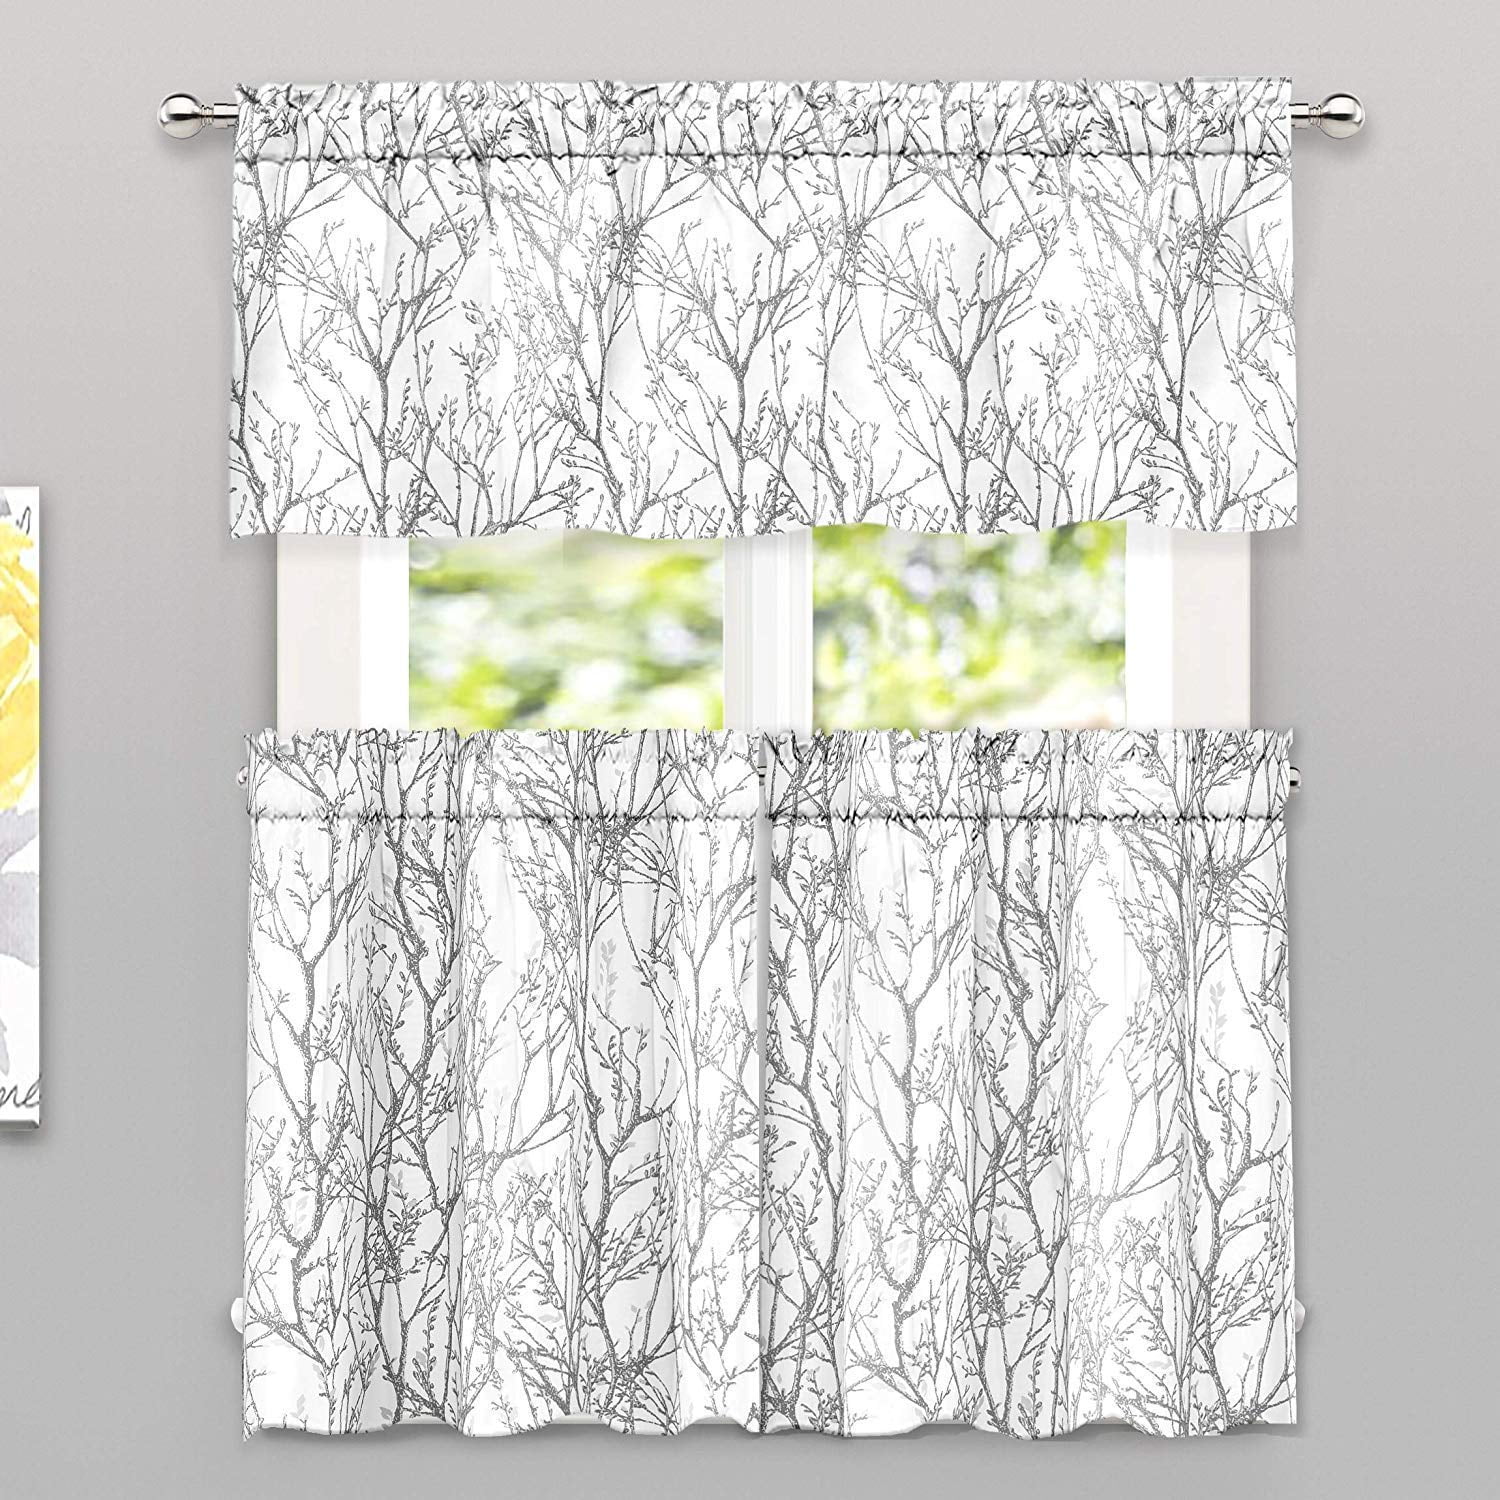 Driftaway Tree Branch Semi Sheer 3, How To Hang Curtains With A Separate Valance